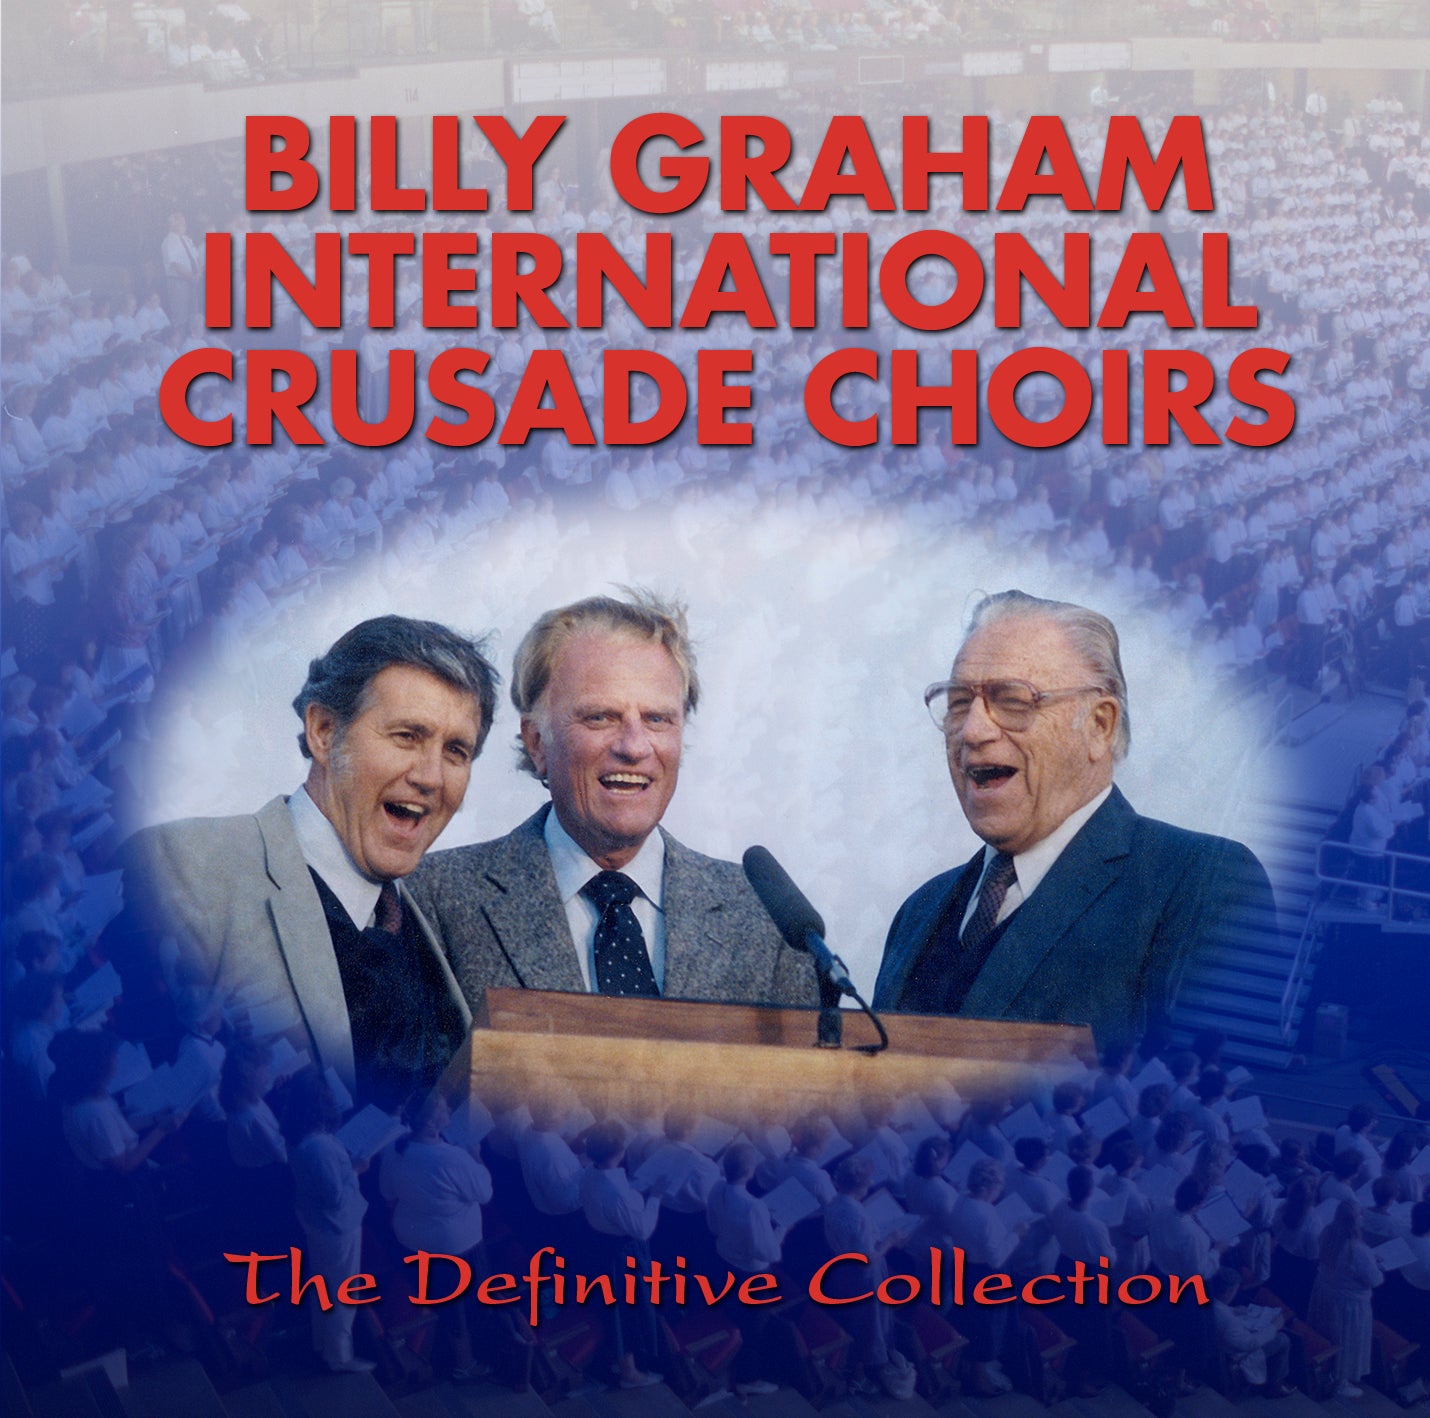 Image of Billy Graham International Crusade Choirs CD other